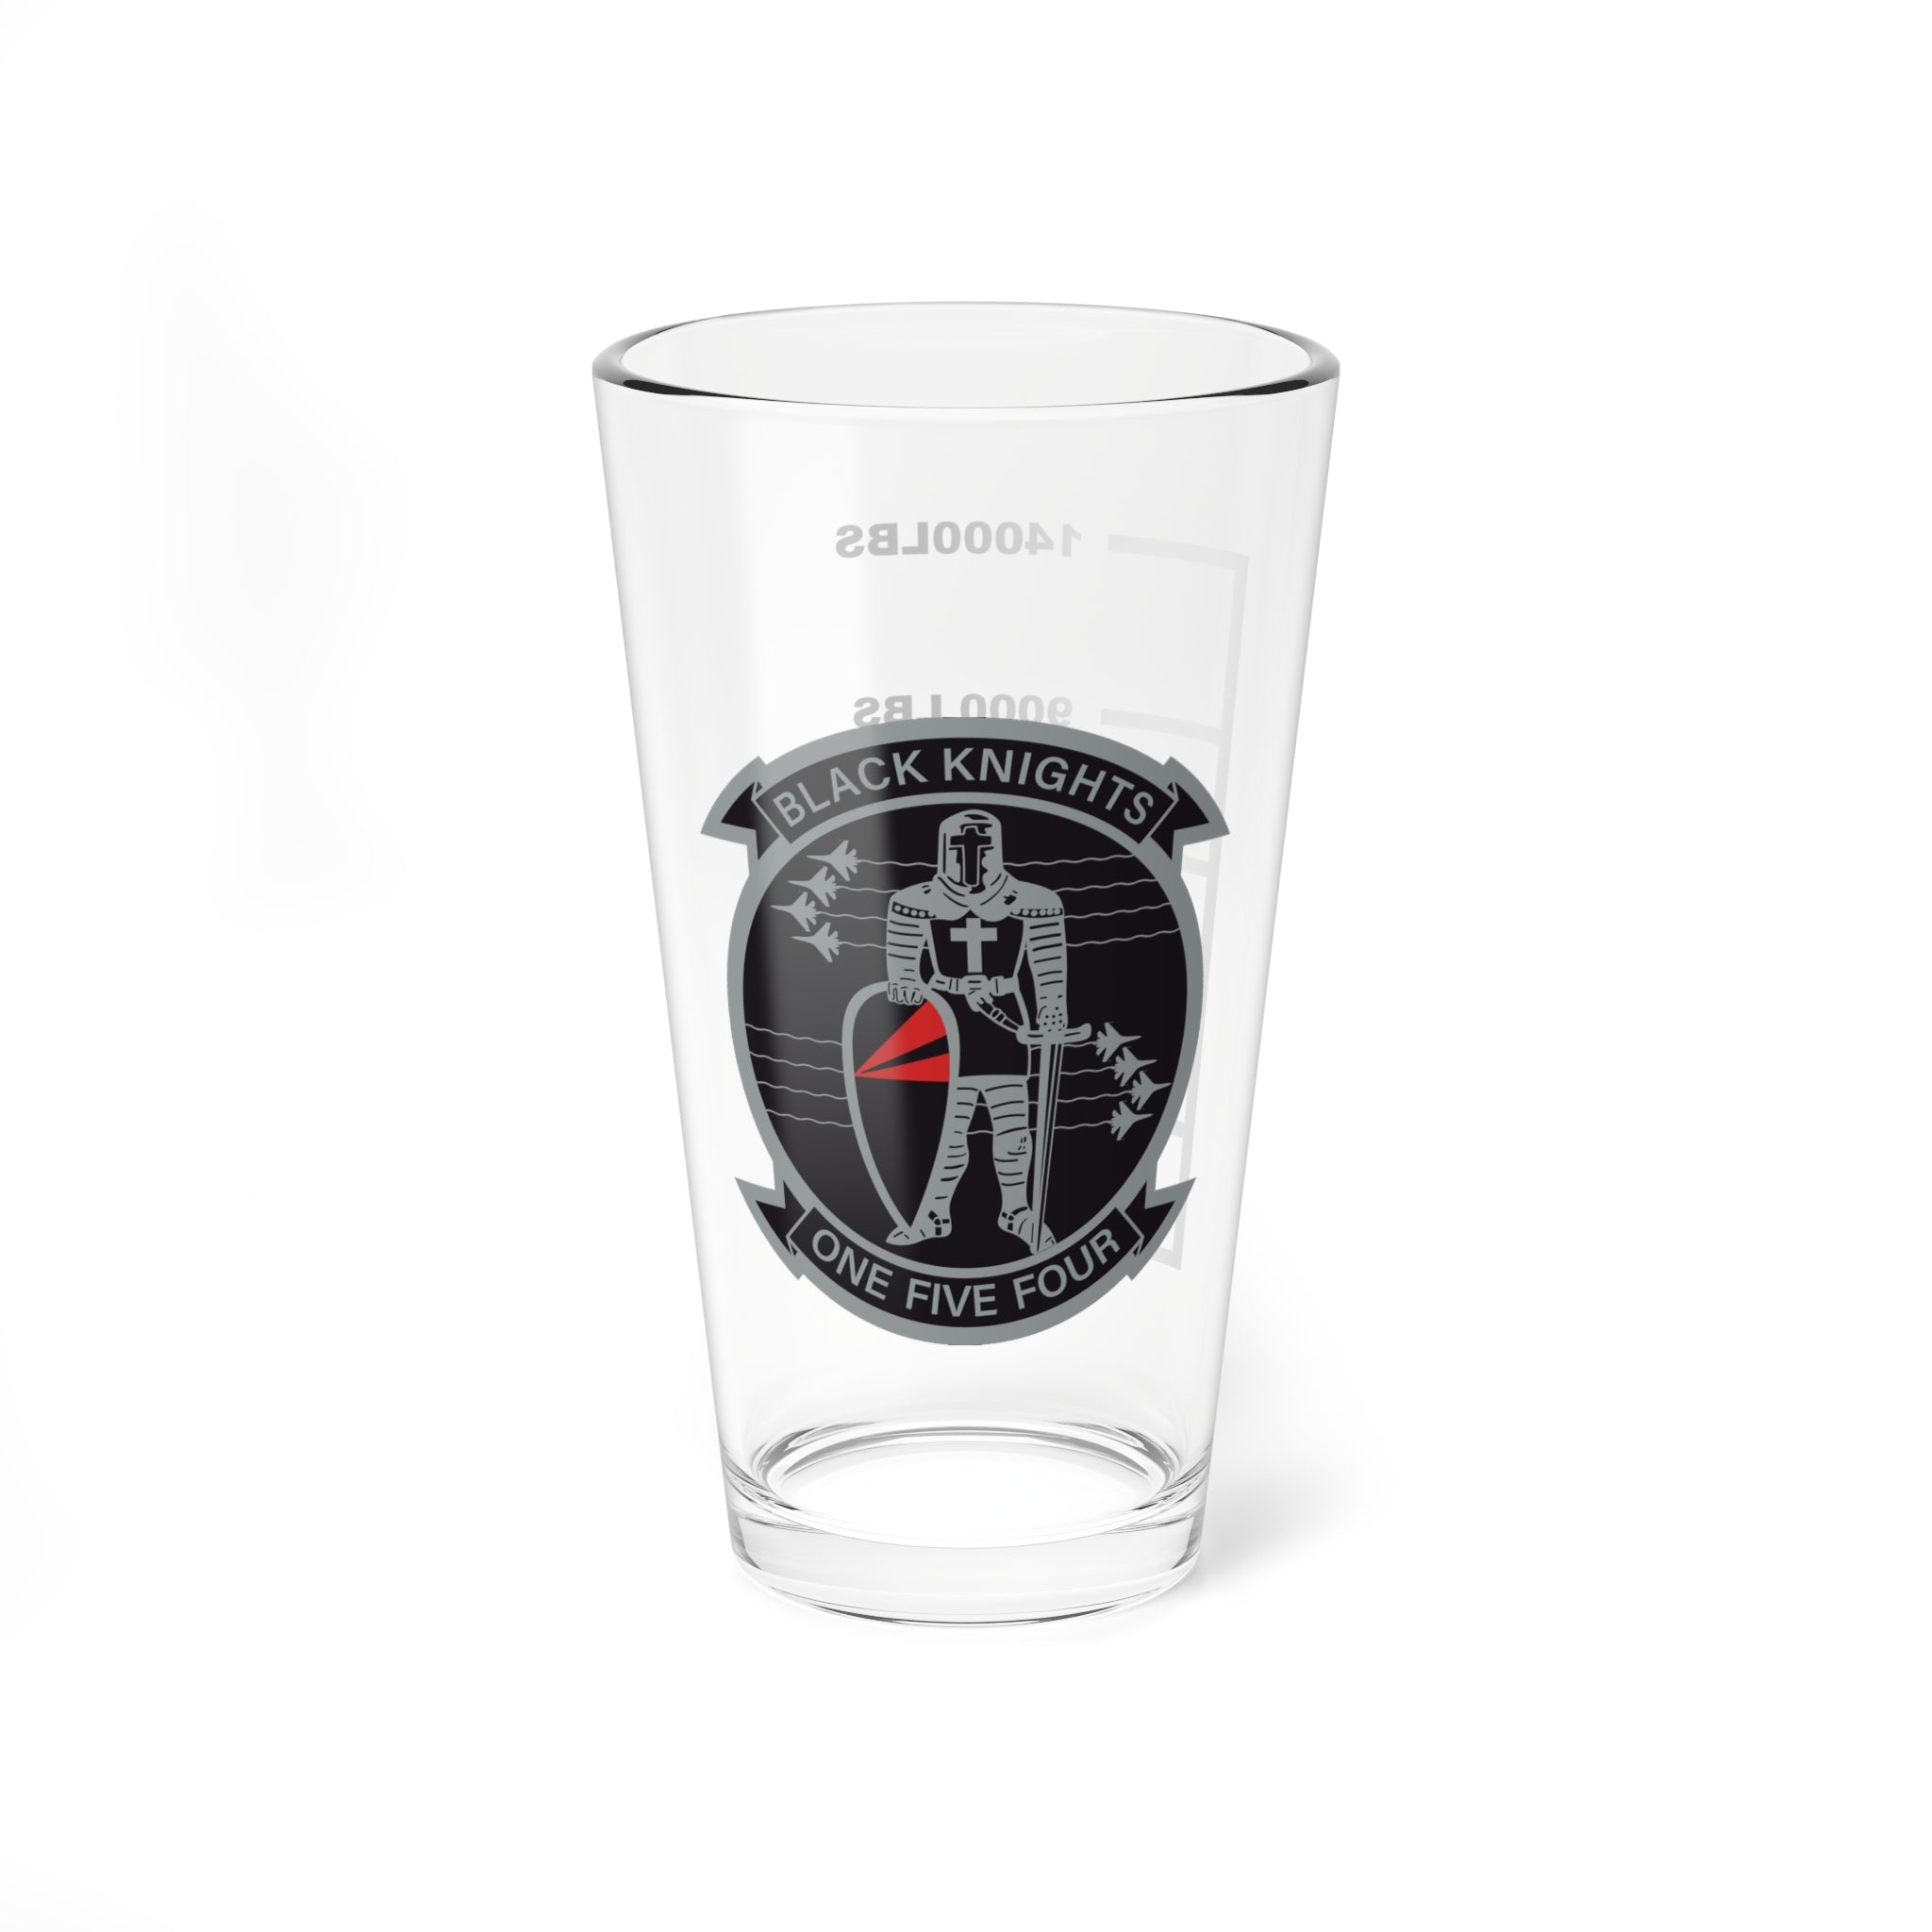 VFA-154 "Black Knights" Fuel Low Pint Glass, Navy Strike Fighter Squadron flying the F/A-18 Hornet